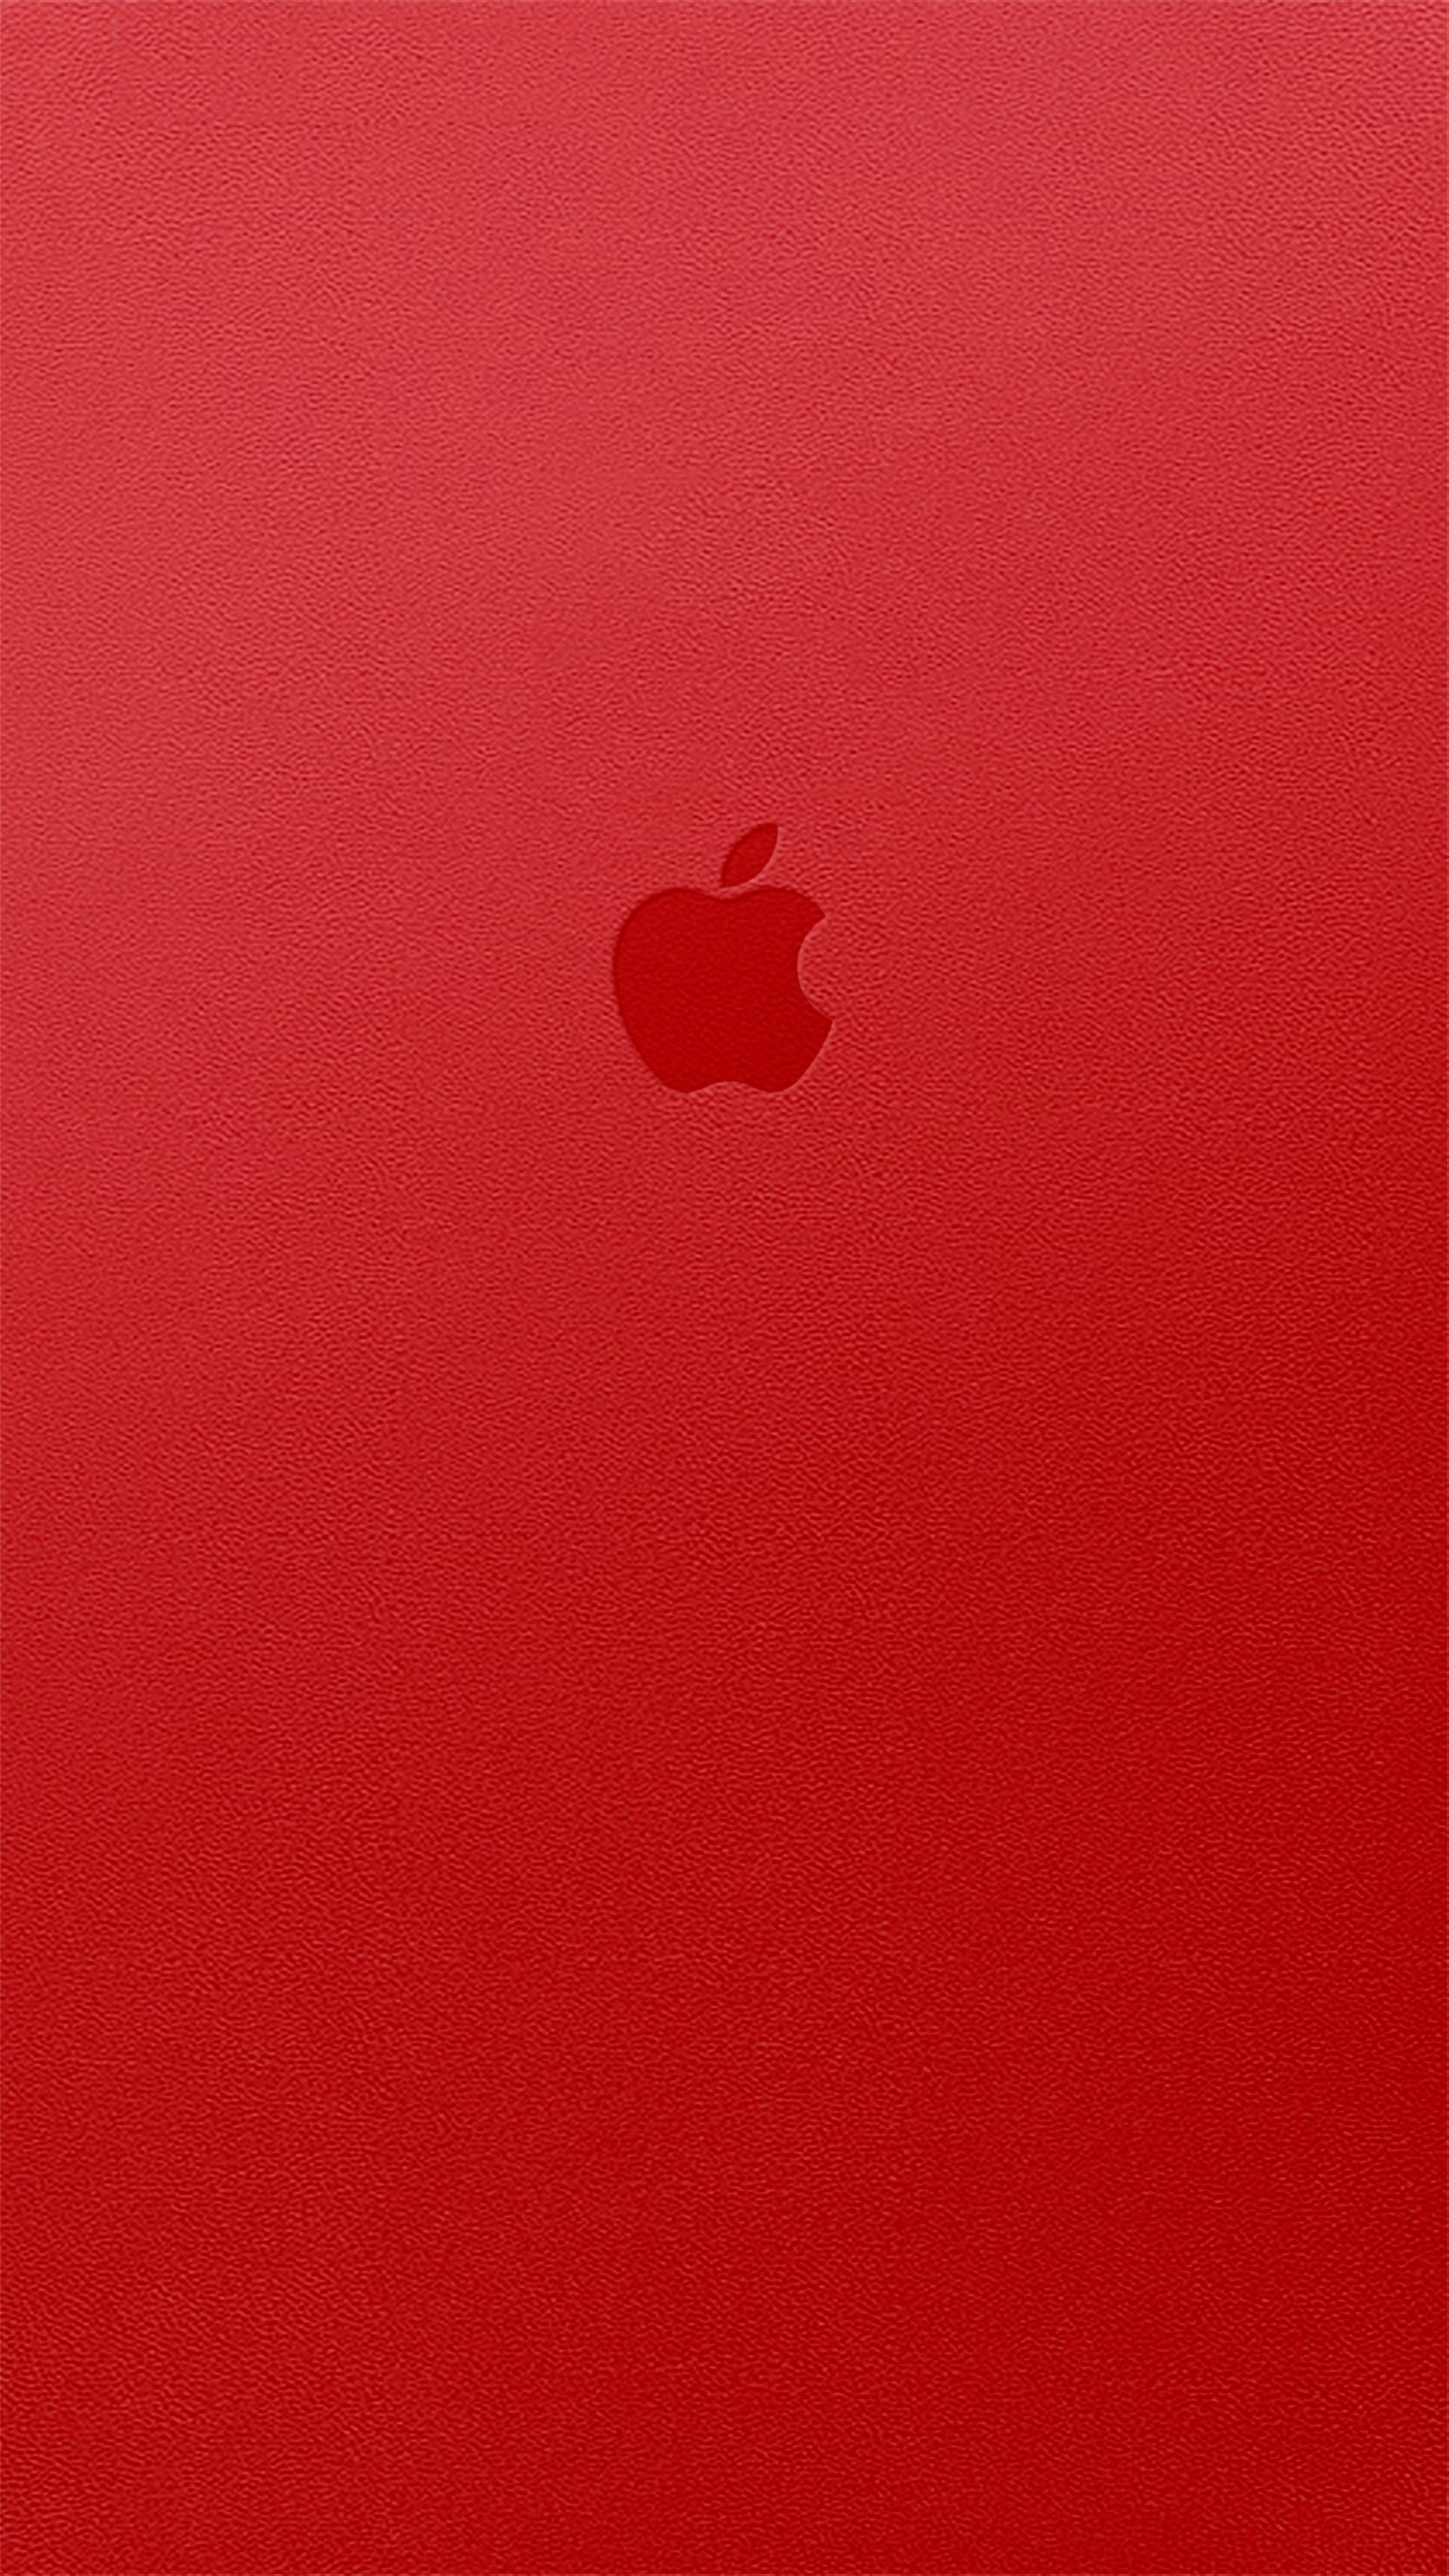 1497x2662 Red Wallpaper Iphone